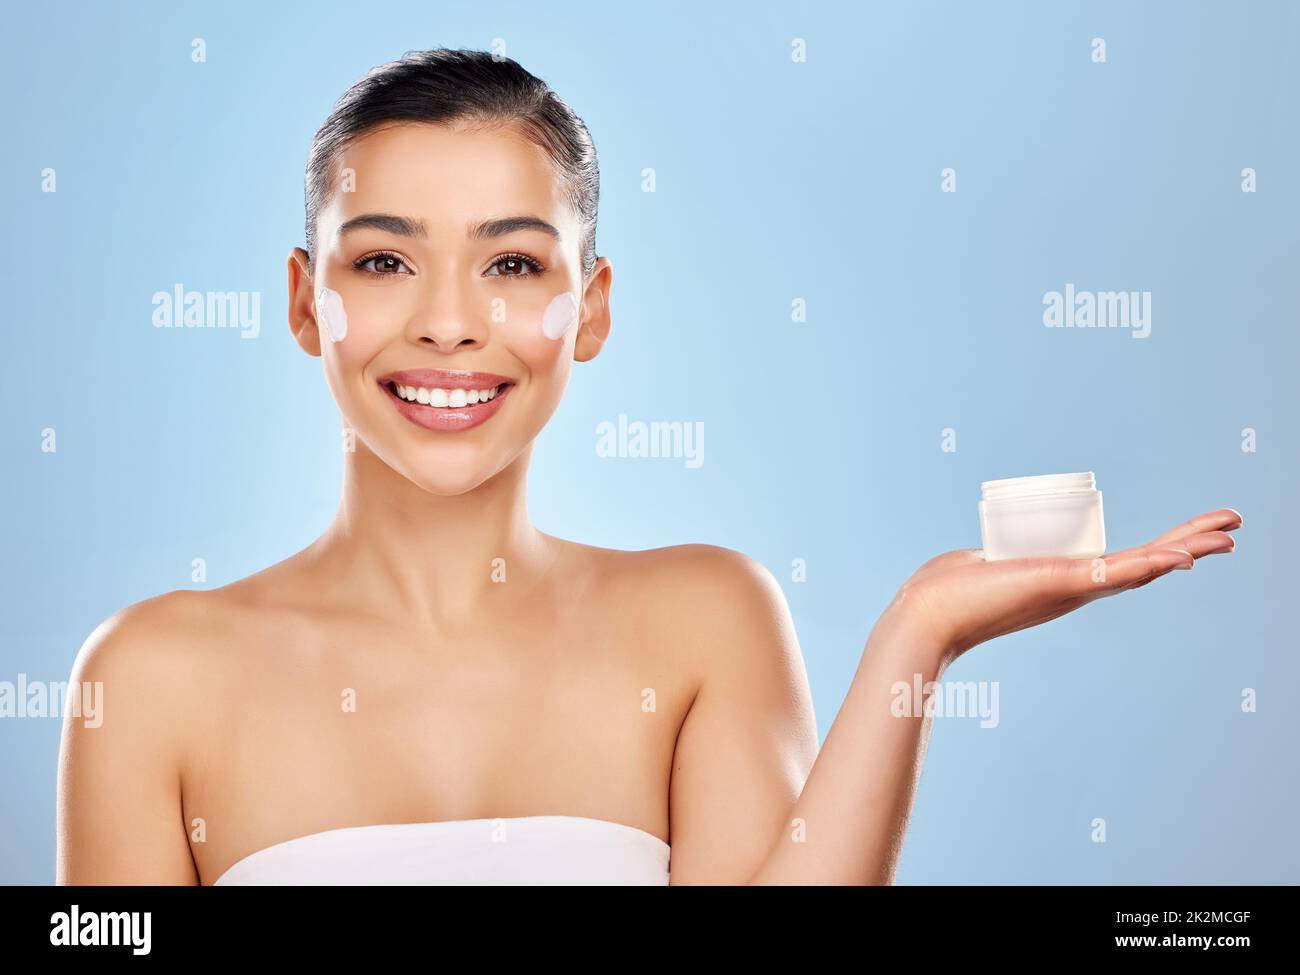 You wont find anything better than this for your skin. Studio portrait of an attractive young woman holding a beauty product against a blue background. Stock Photo